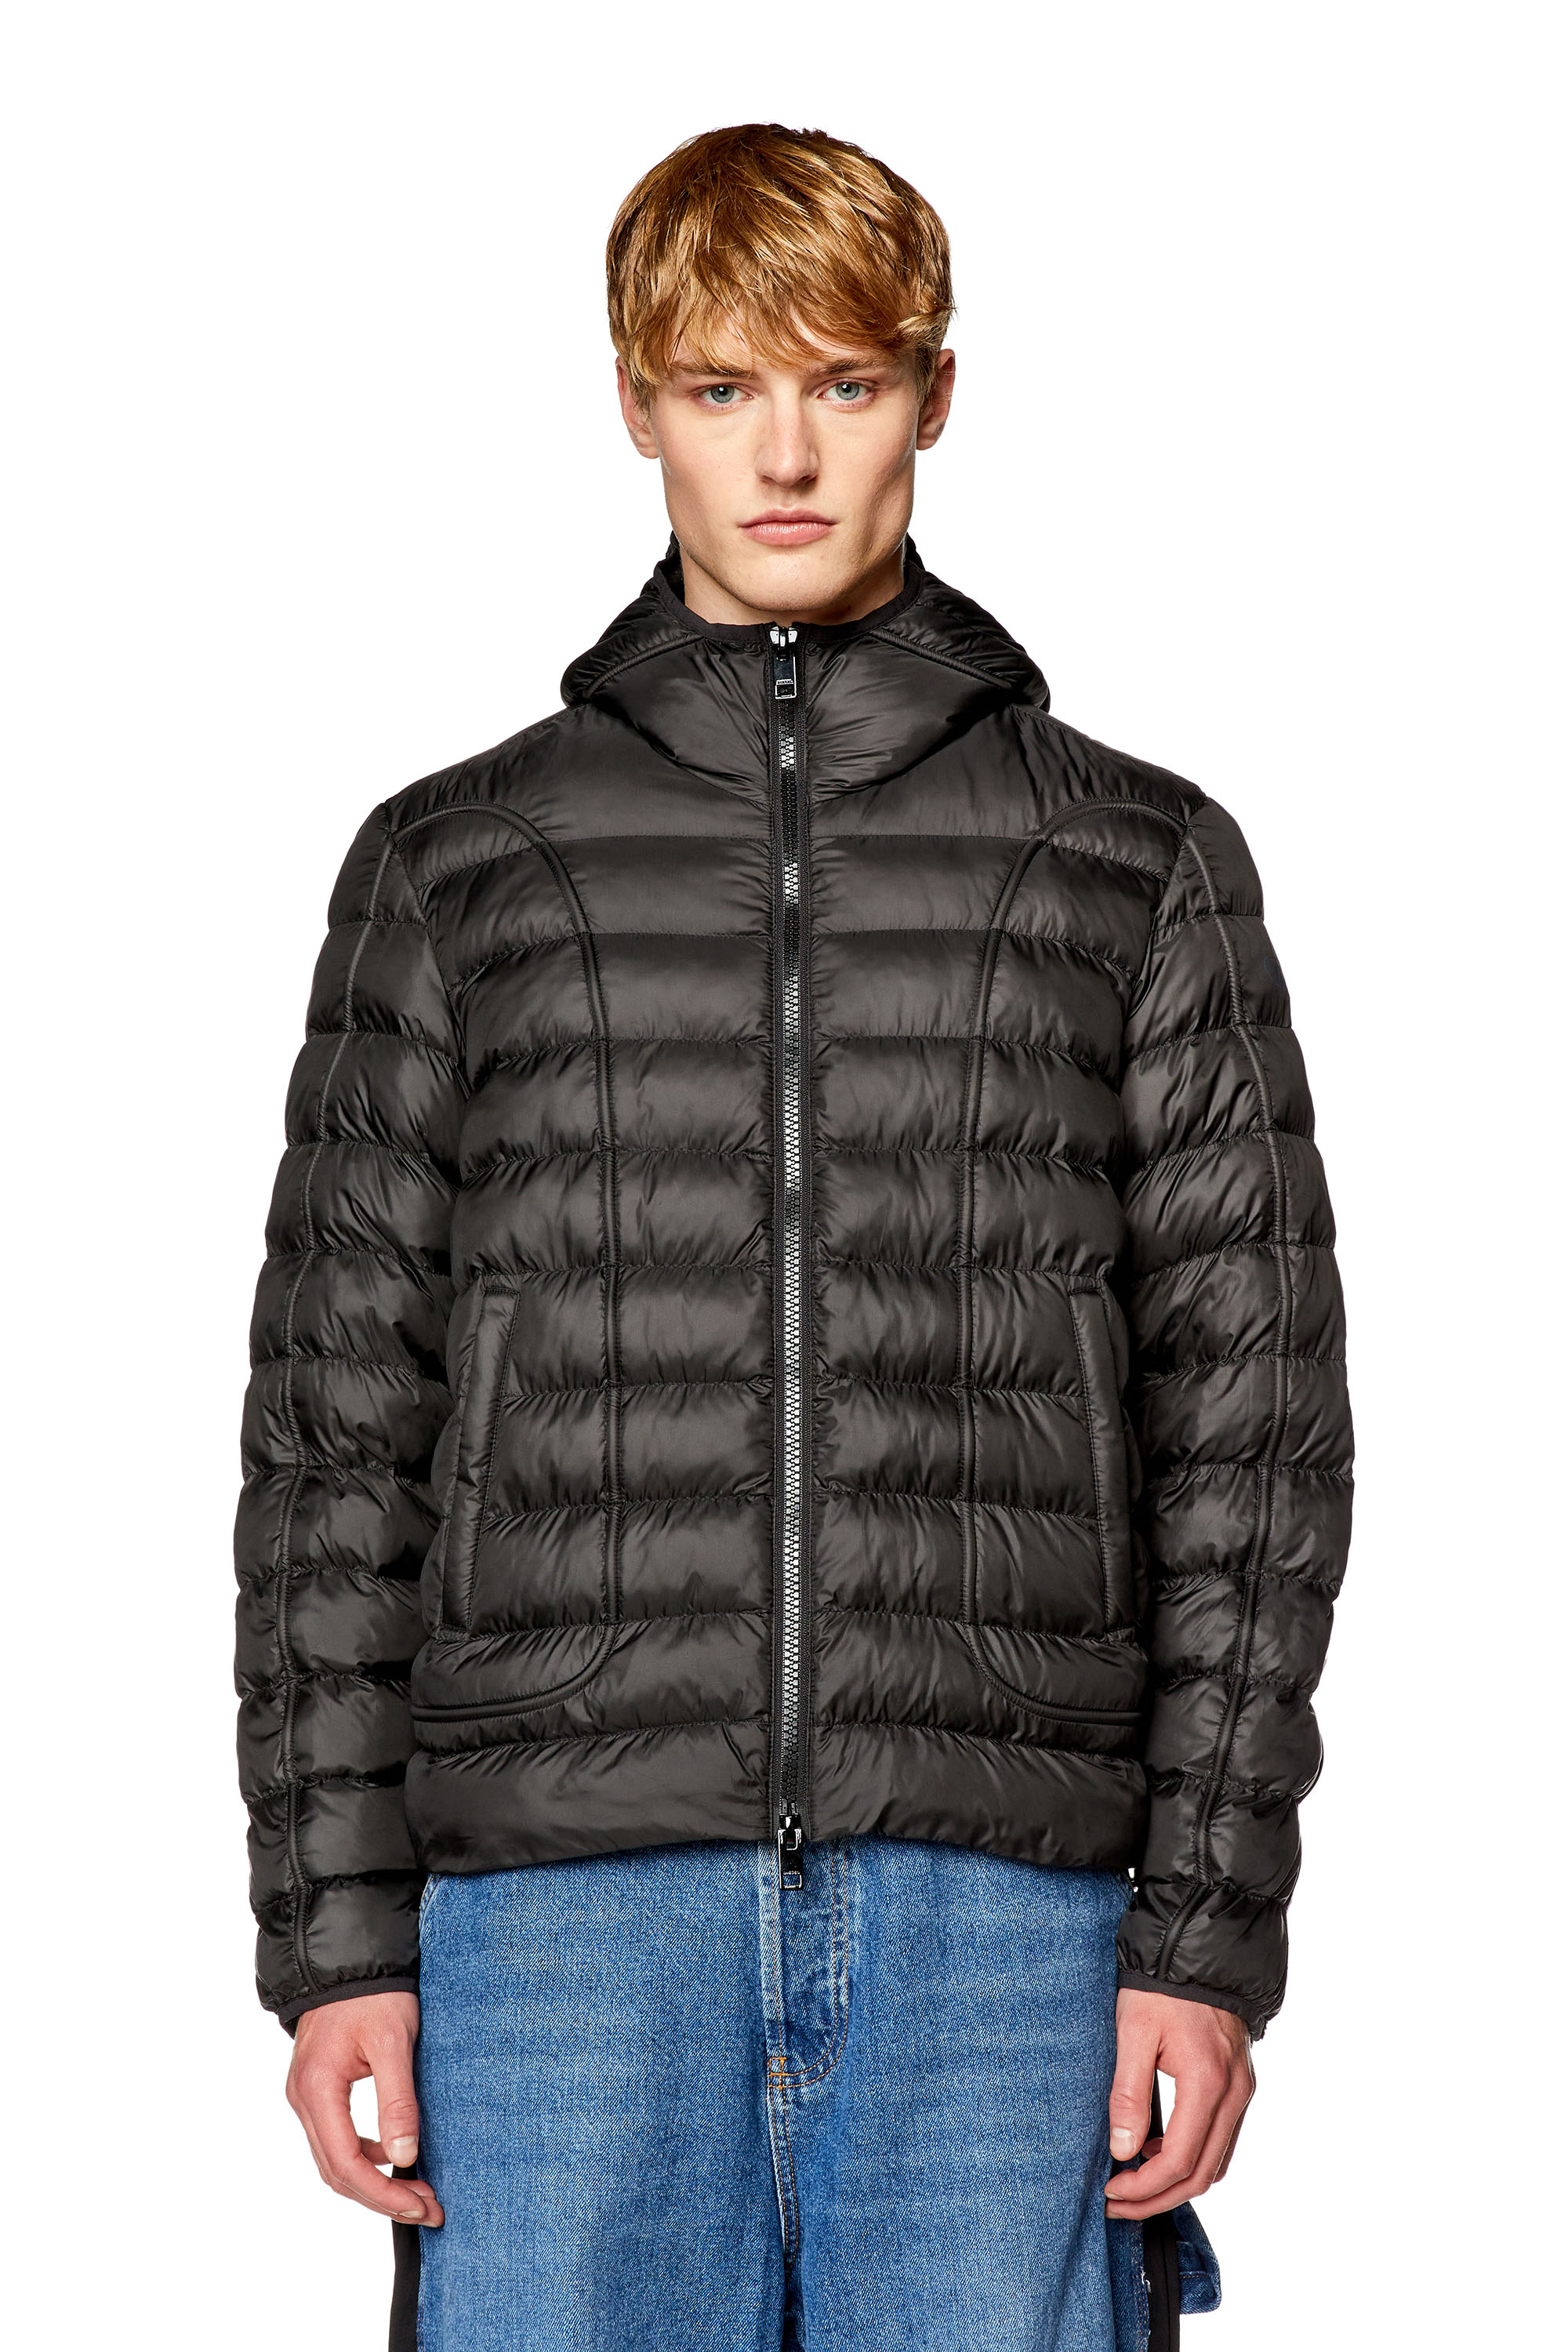 Calvin Klein Performance Jackets for Men - Shop Now at Farfetch Canada